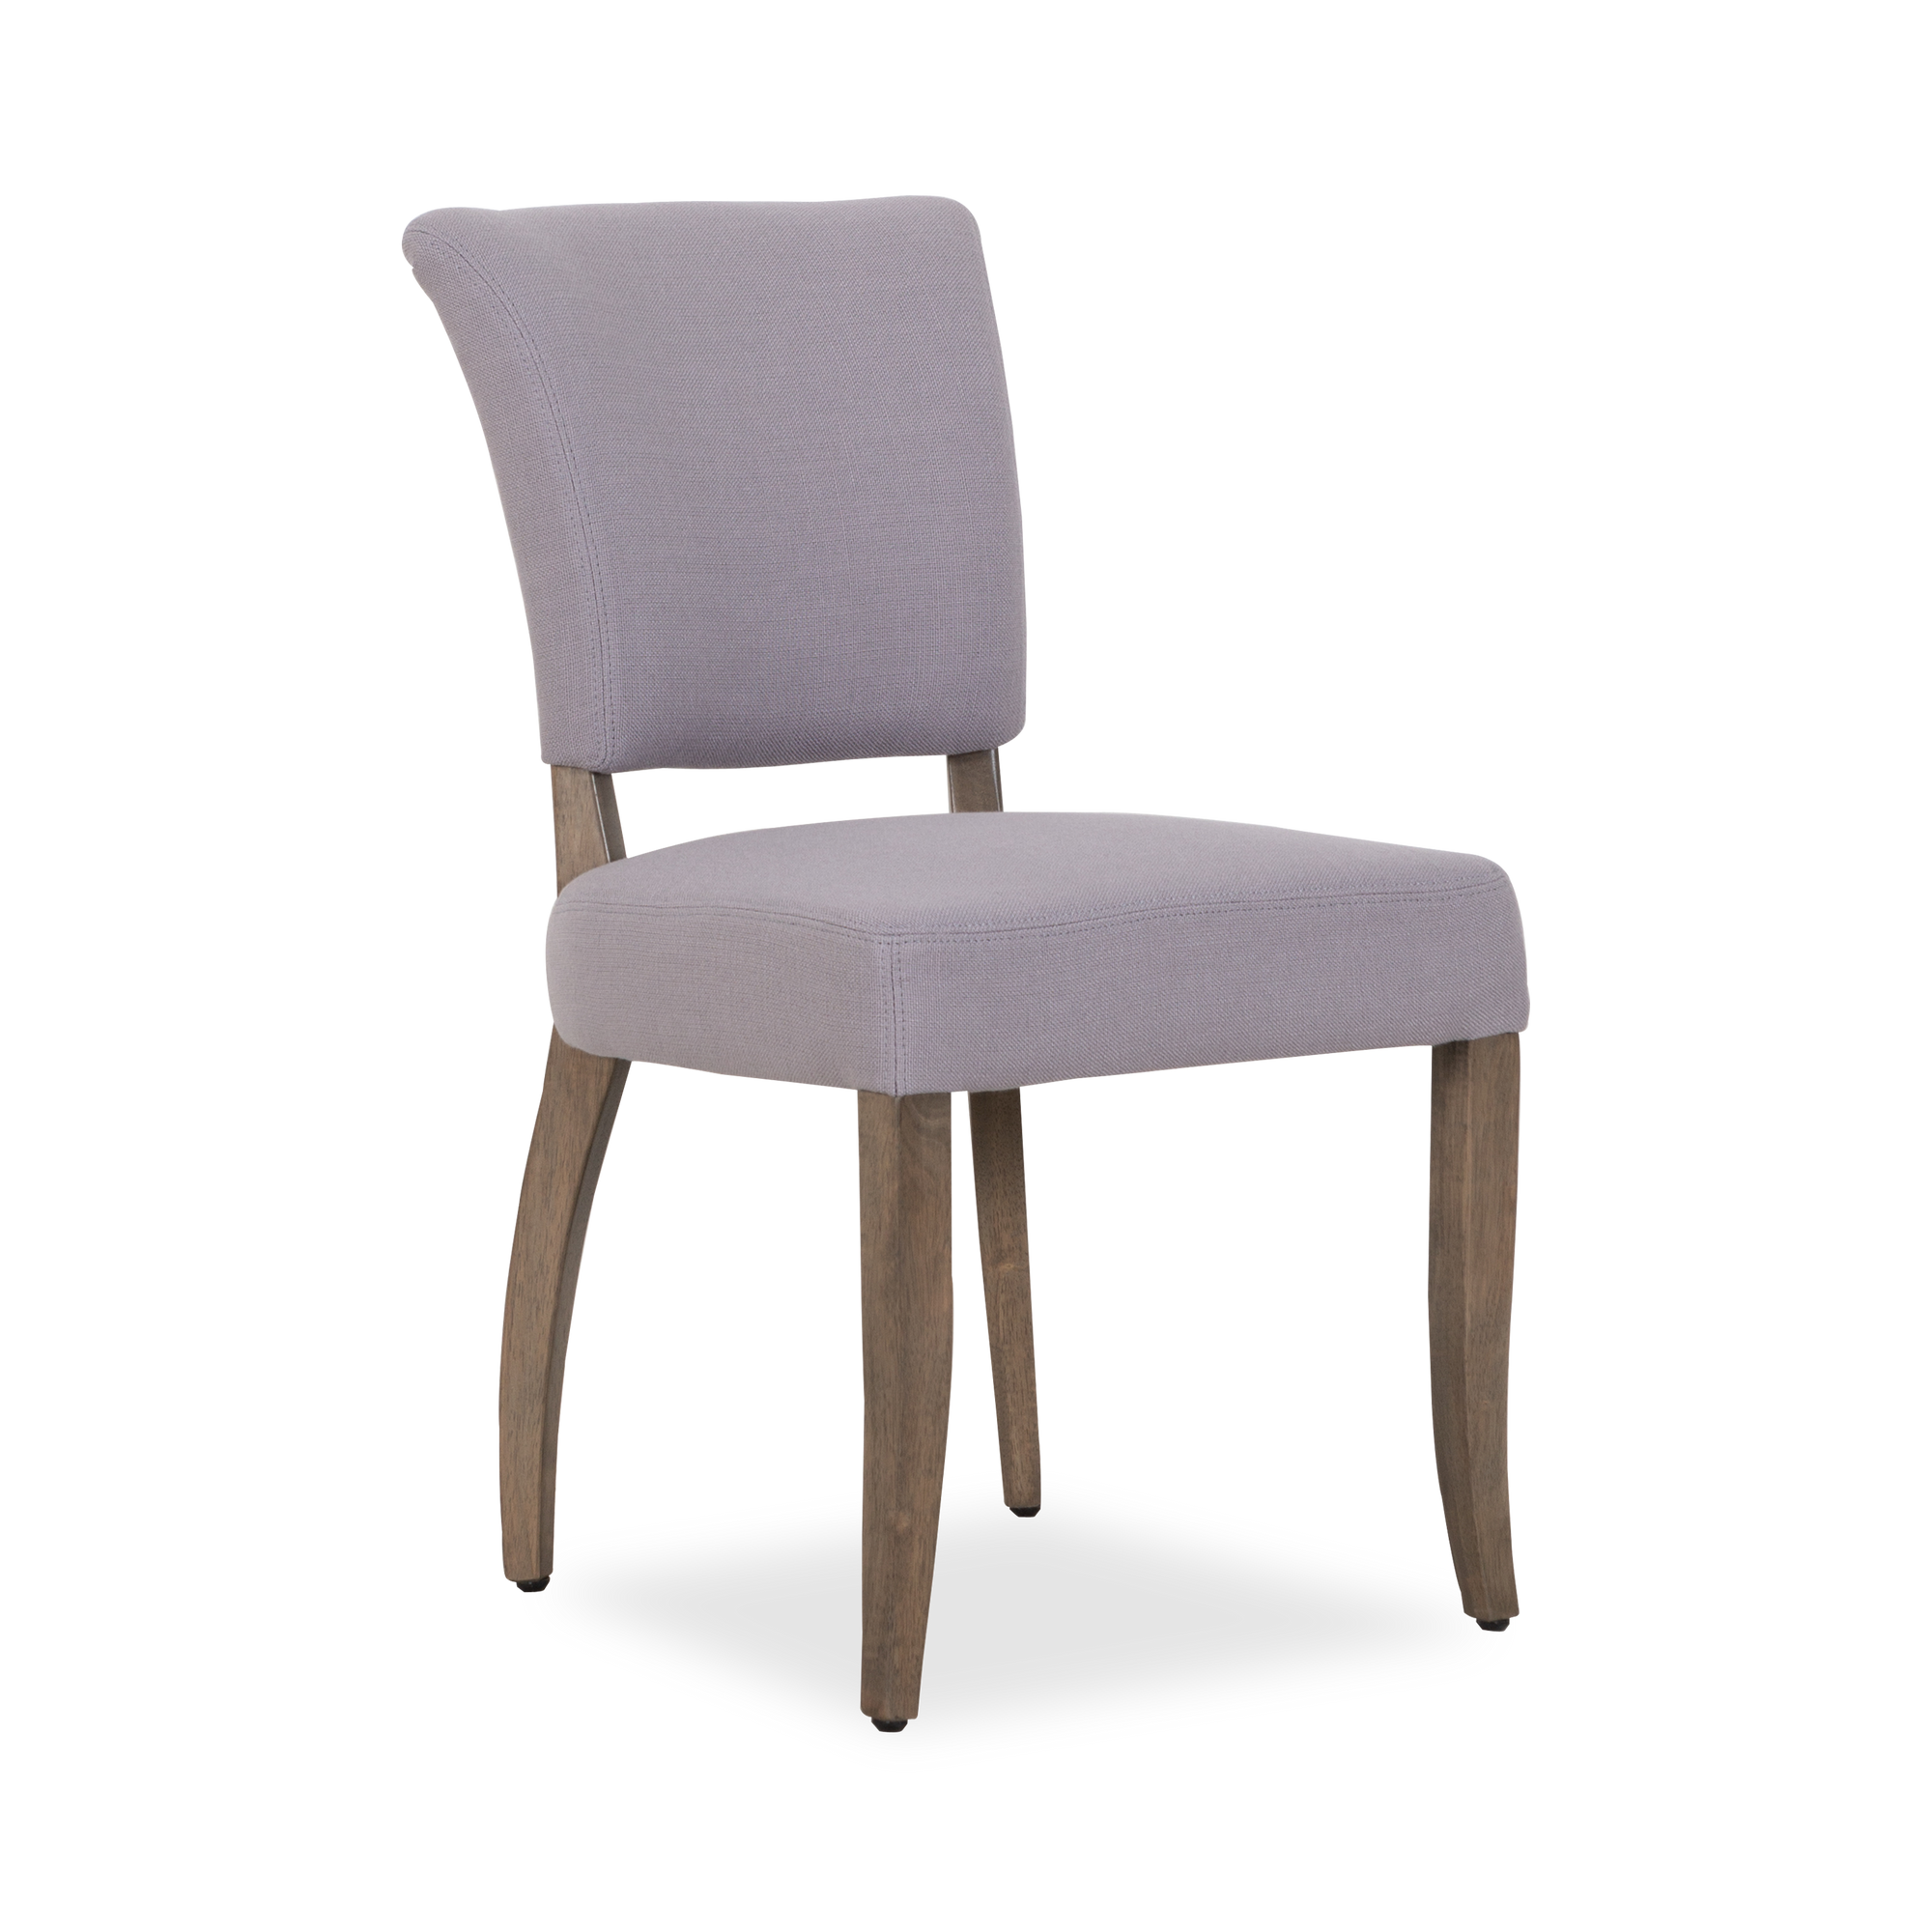 The Mimi Dining Side Chair is a reinvention of a classic 1940s French dining chair with stud detailing and tapered wooden legs.